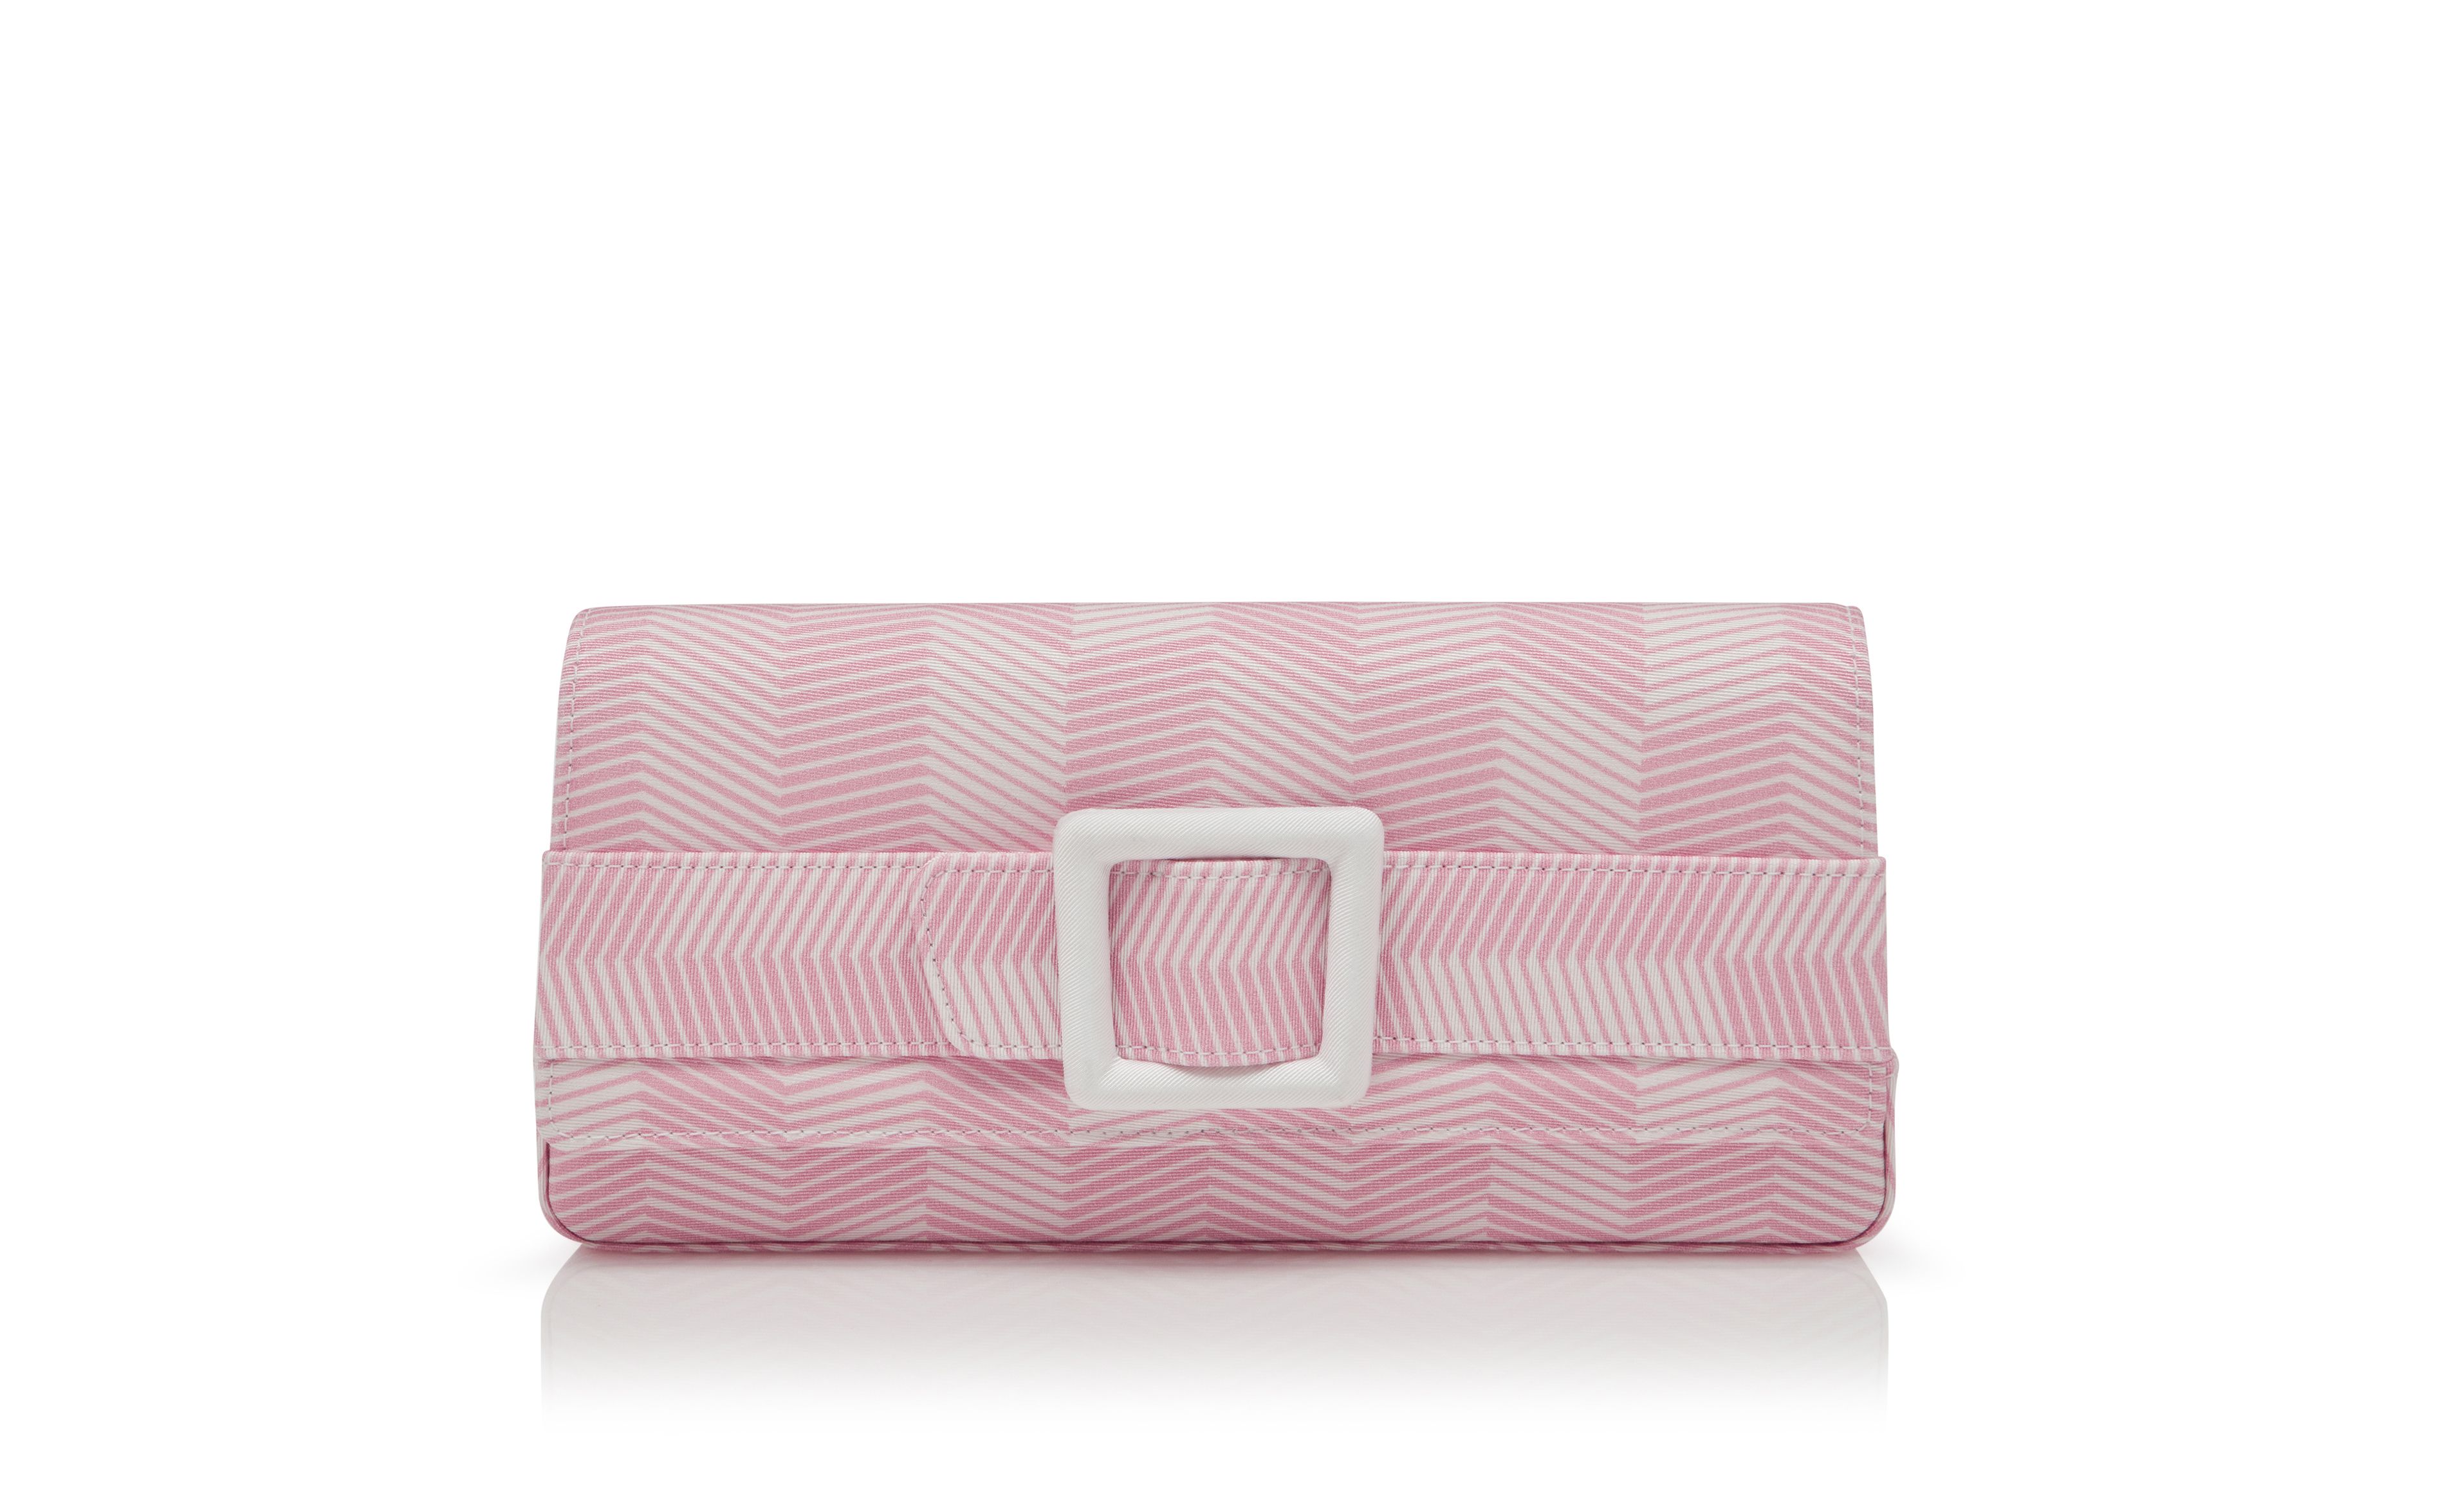 Designer Pink and White Grosgrain Buckle Clutch - Image thumbnail